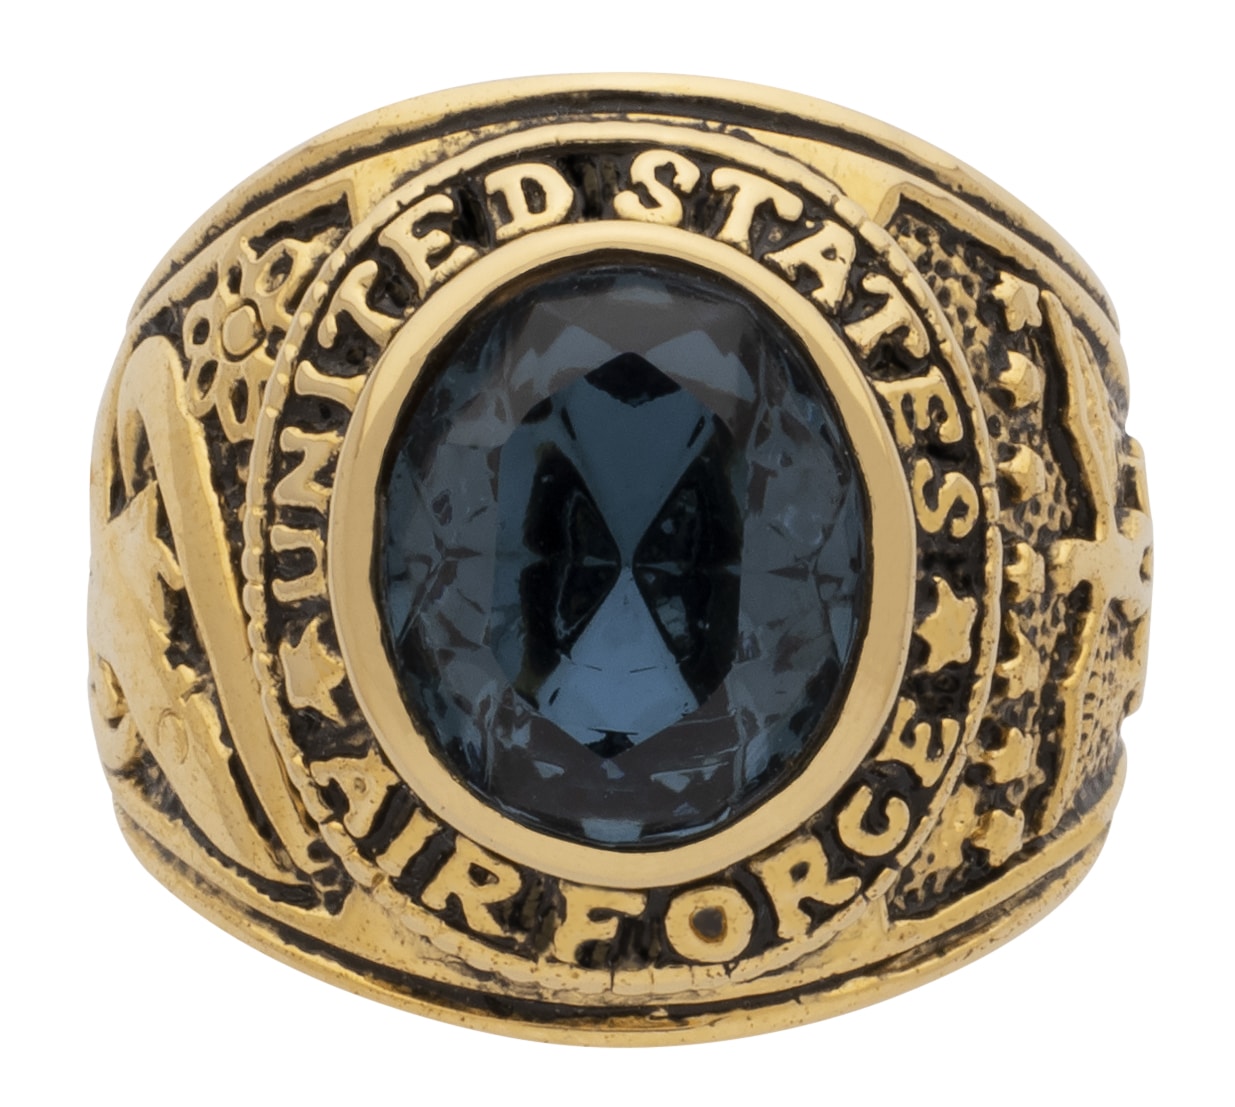 Personalized SEA US Navy Class Ring